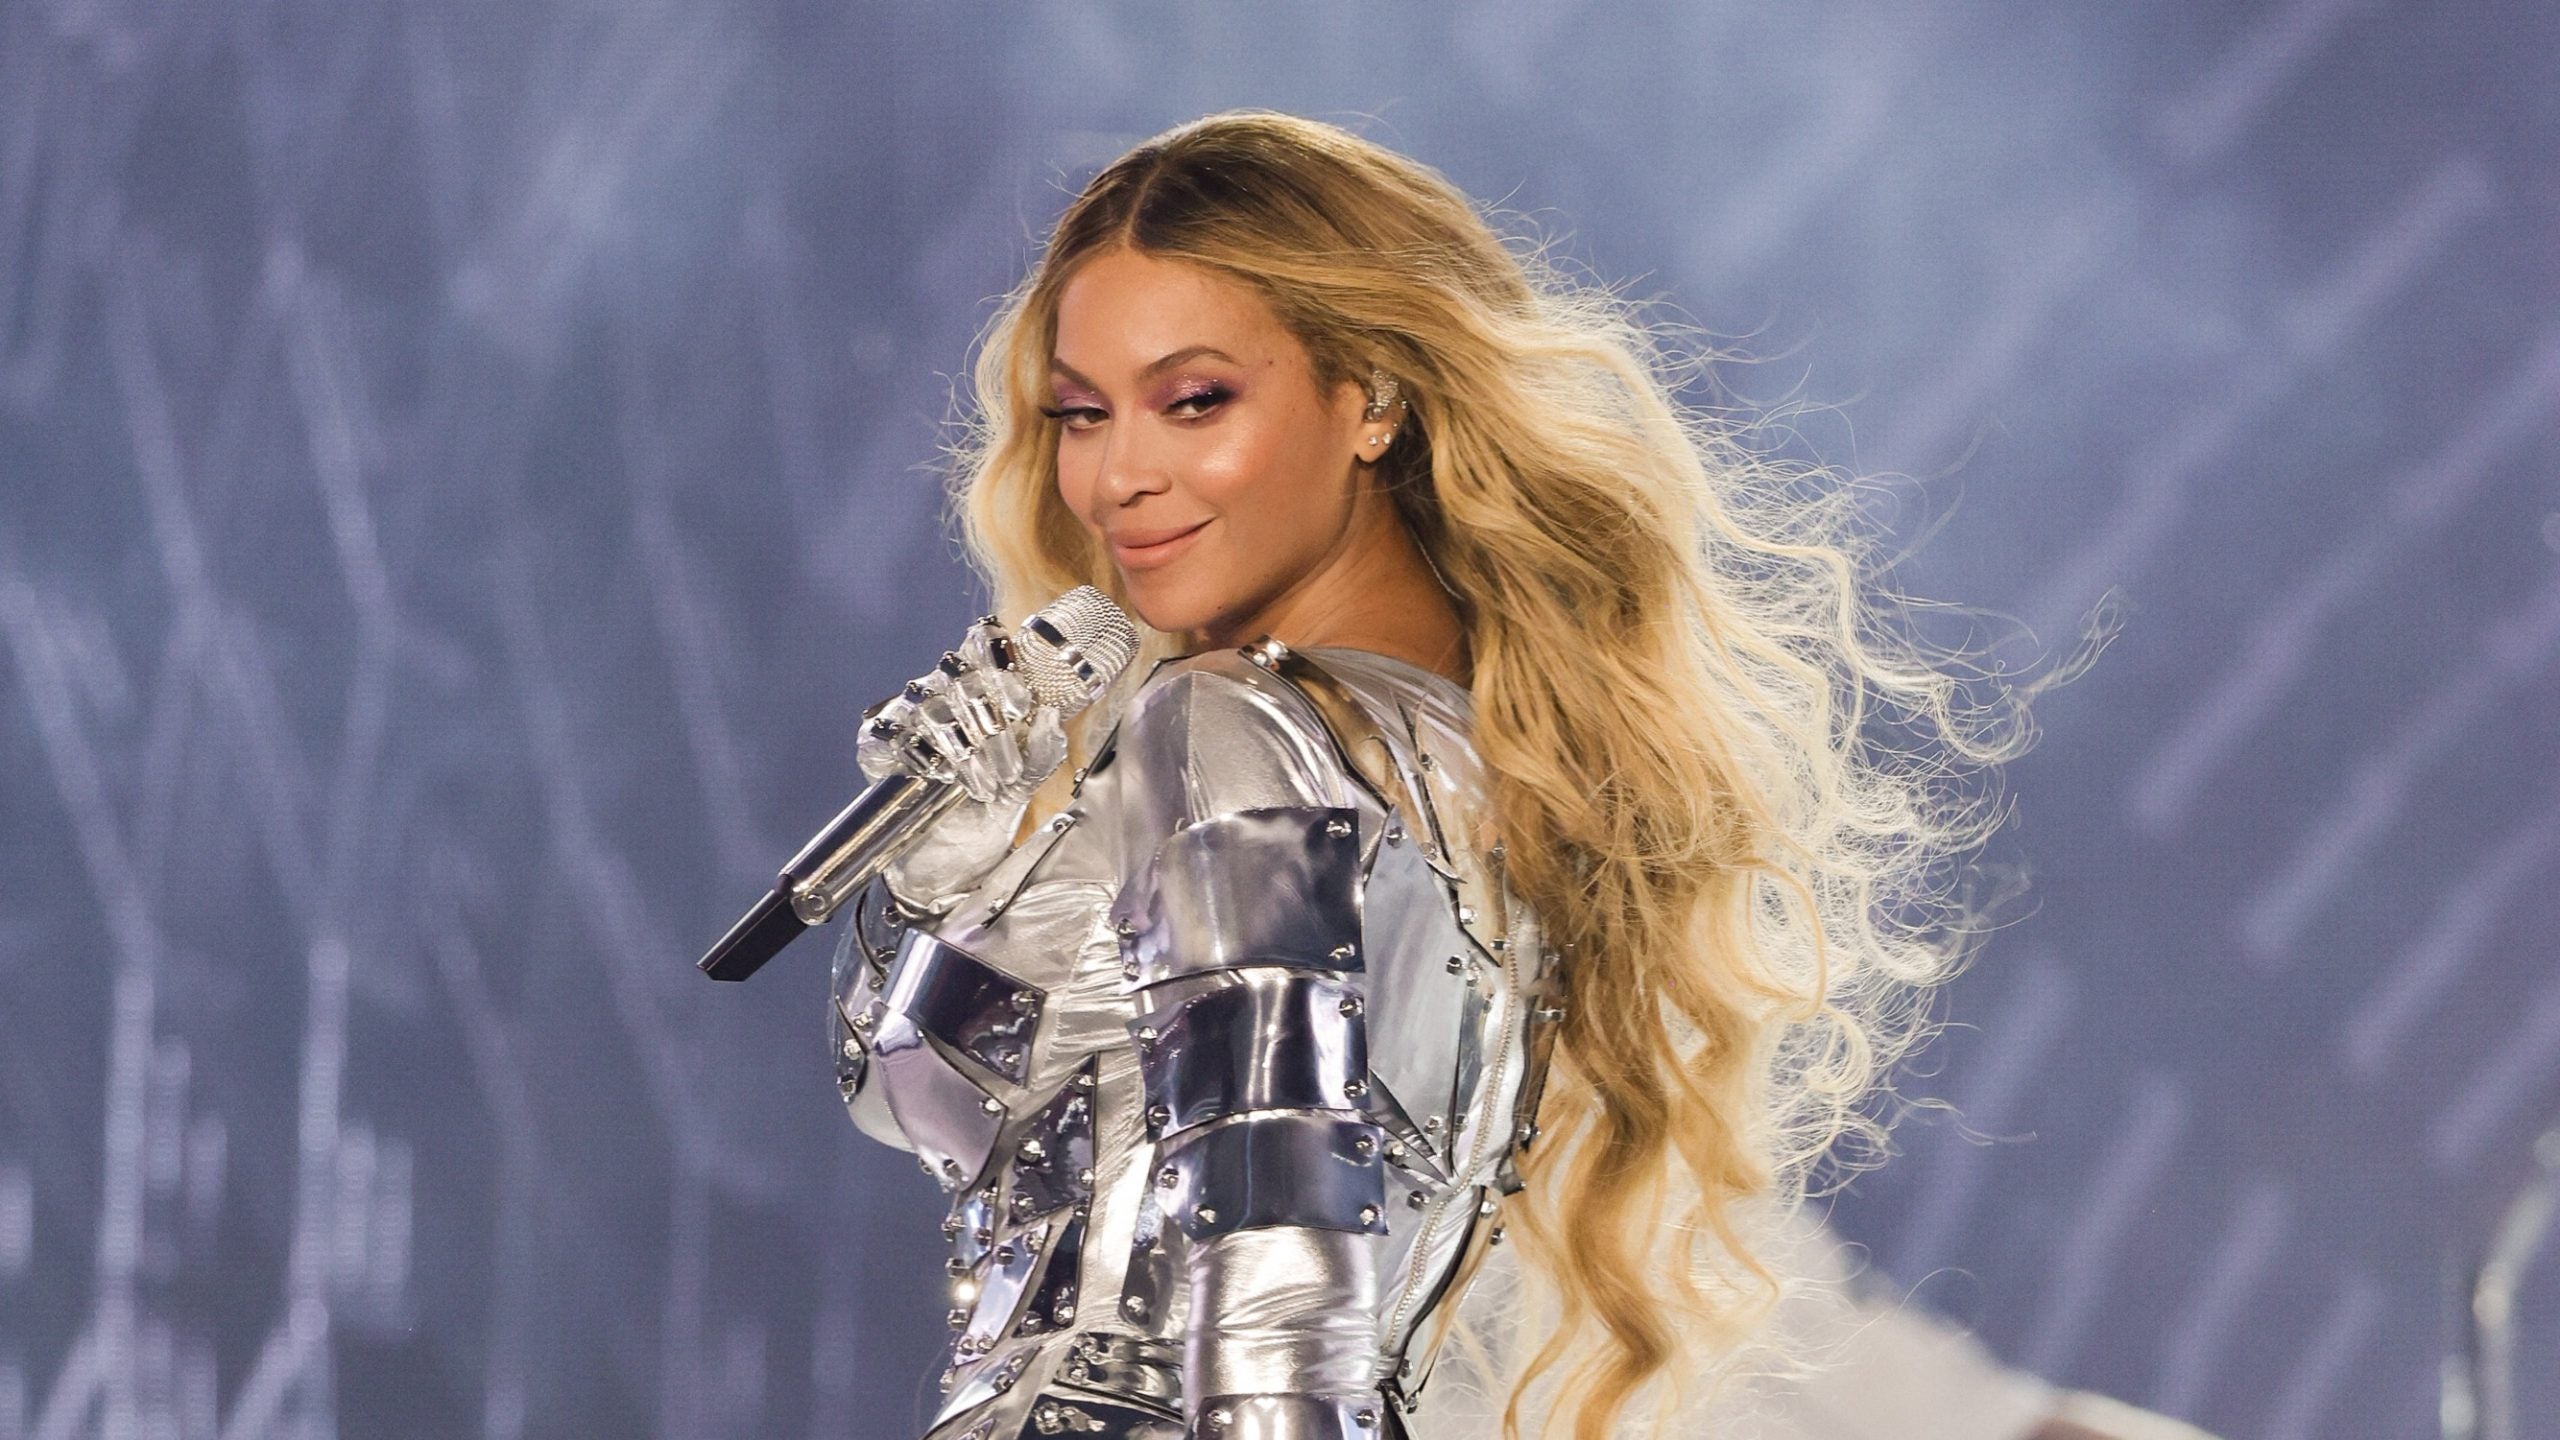 What To Wear To Your Screening Of Beyoncé’s “Renaissance” World Tour Film